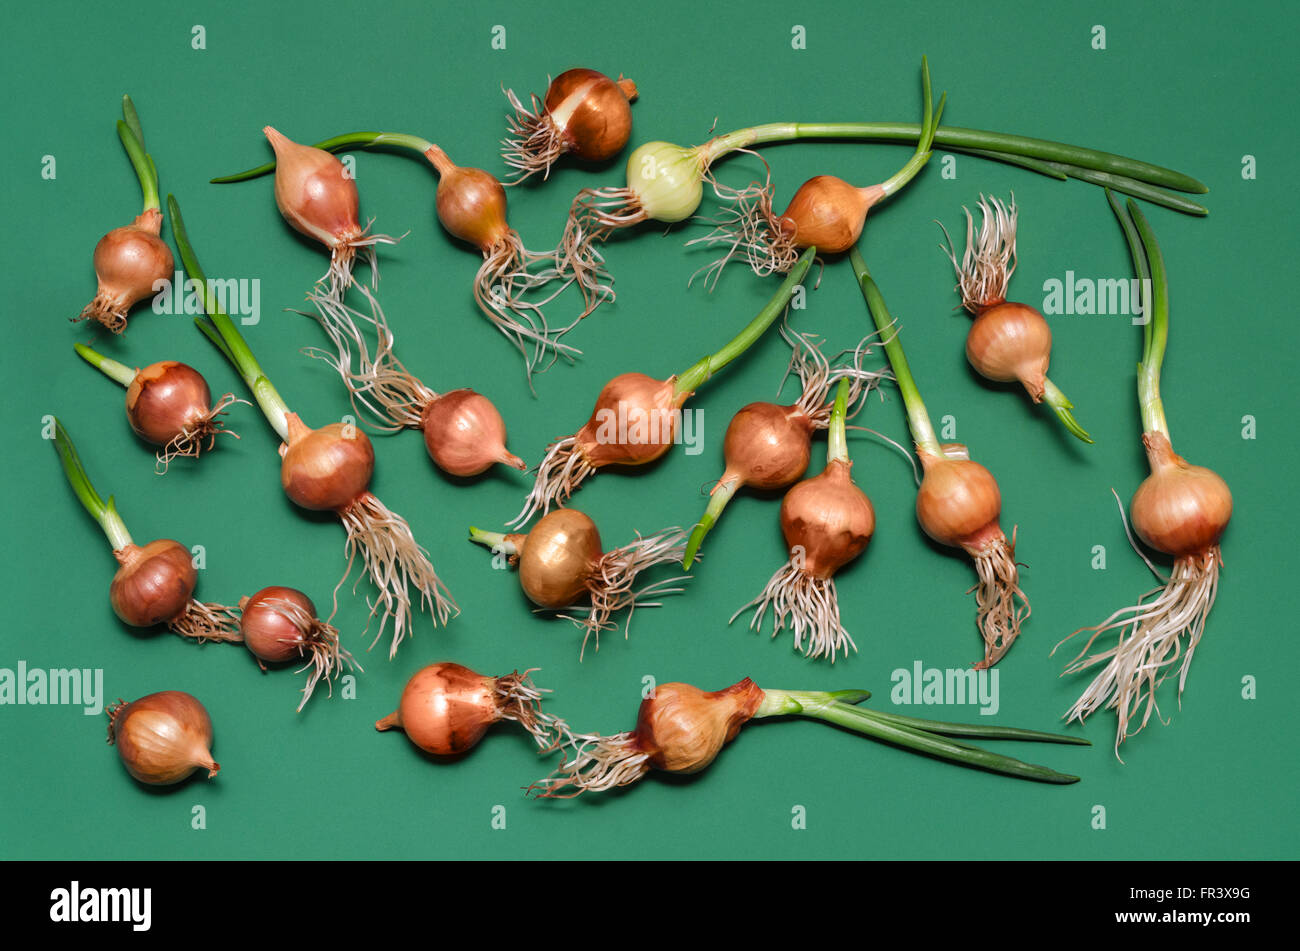 Sprouted onions for planting crops on a green background. Stock Photo